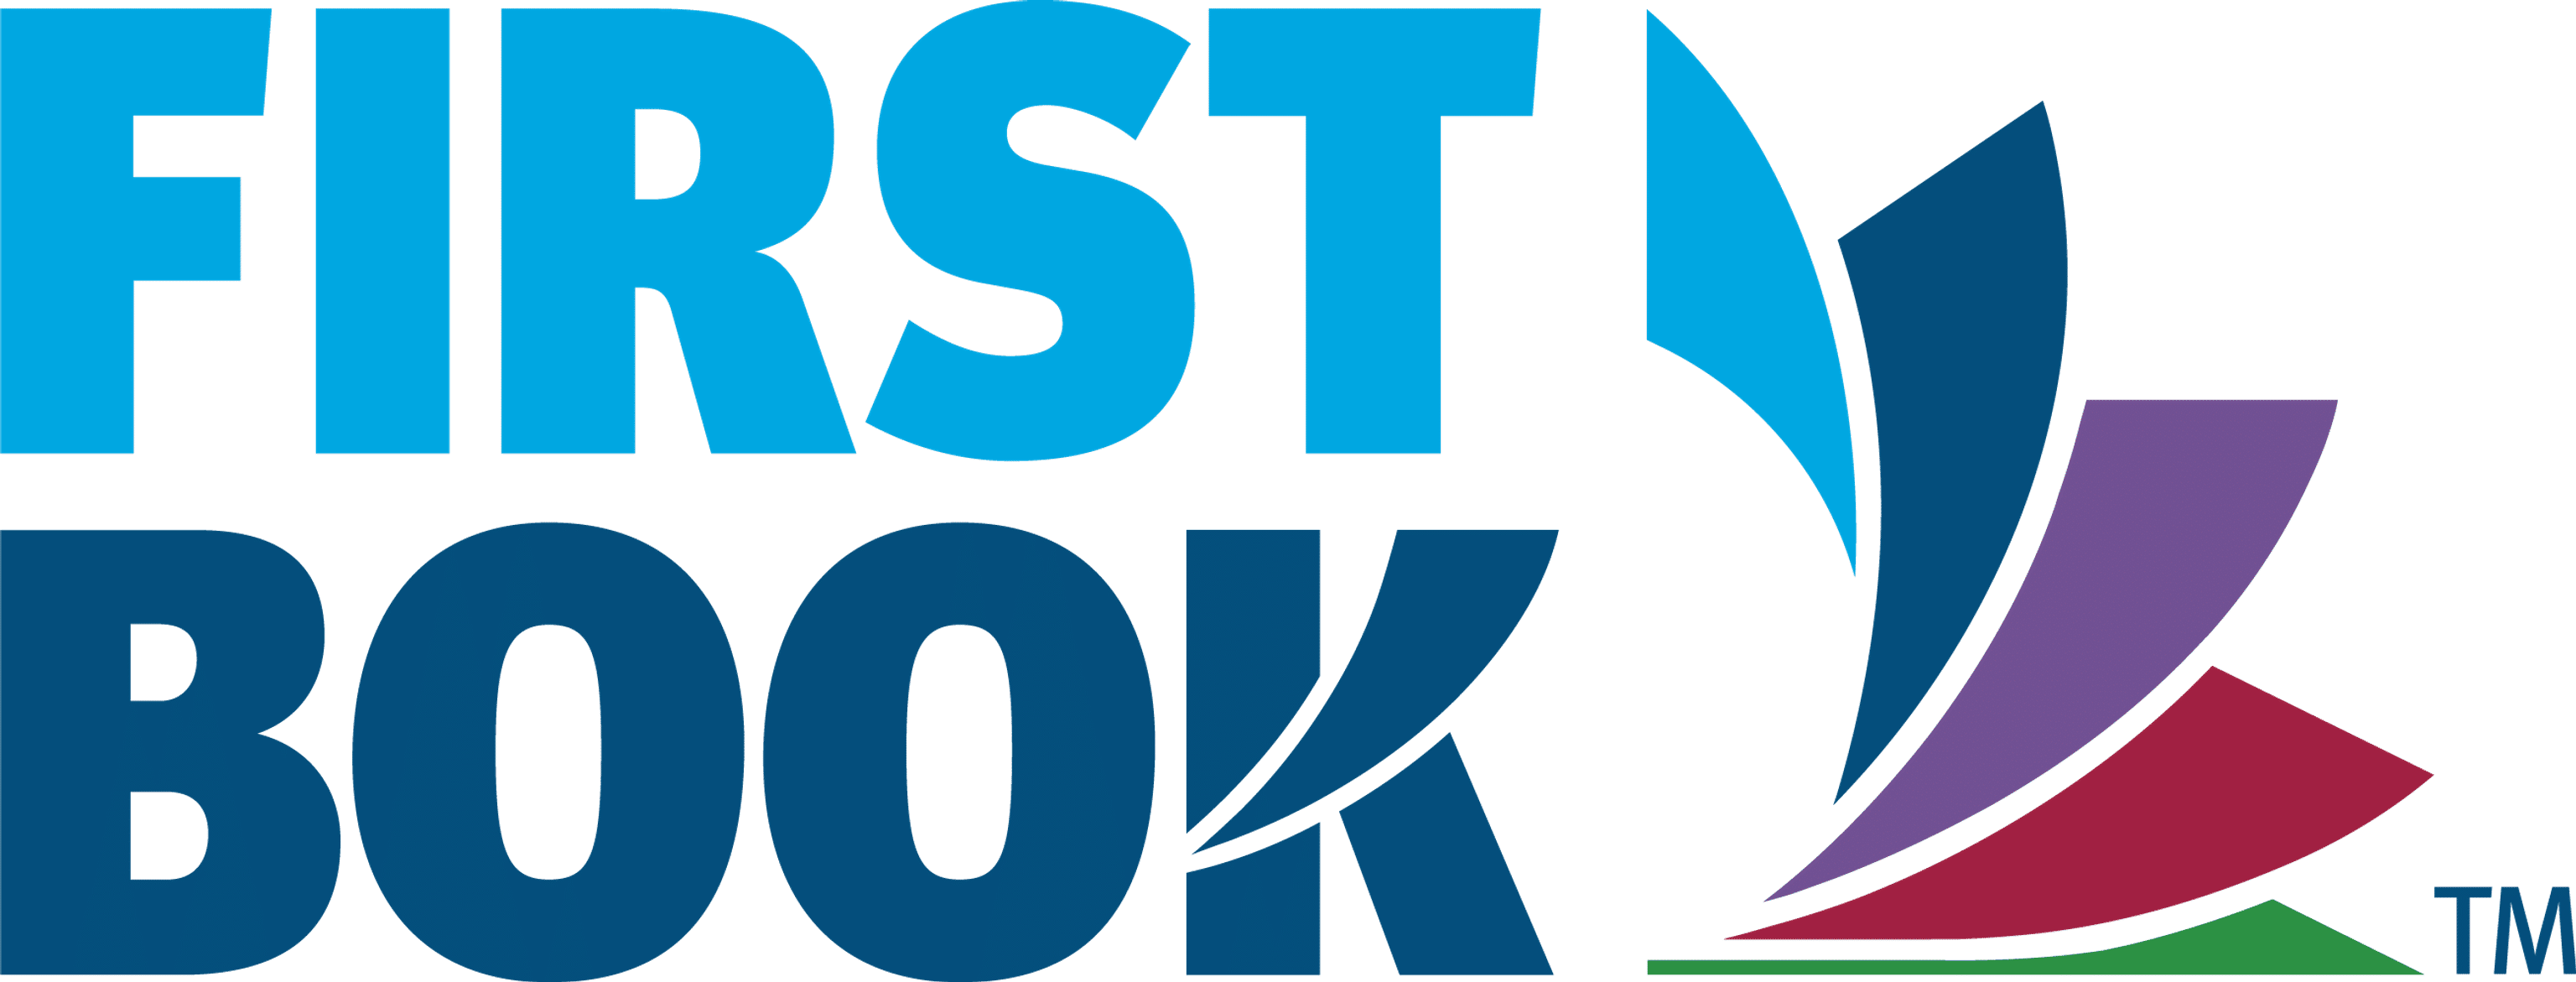 First Book stacked logo